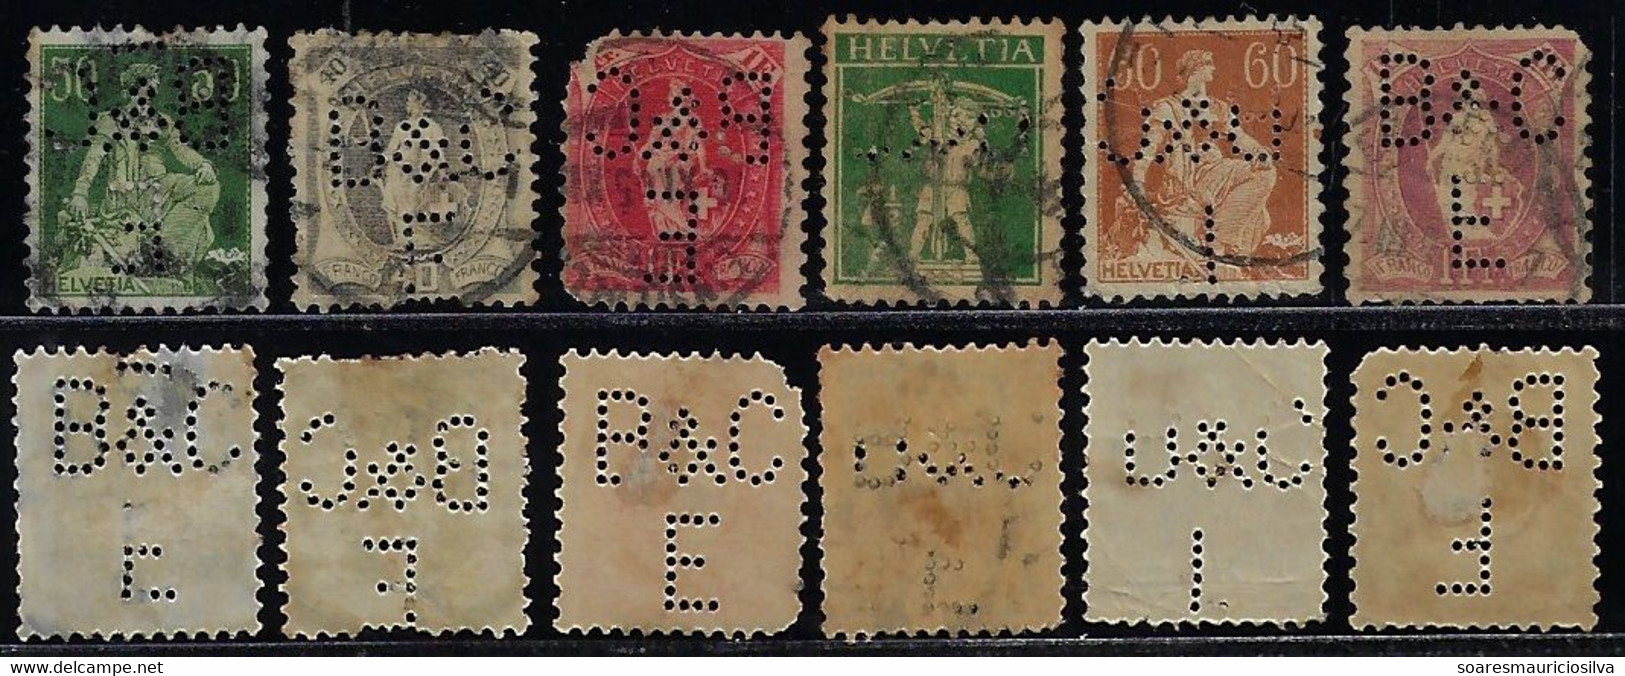 Switzerland 1886 / 1947 6 Stamp With Perfin B&C/E By Benziger & Co AG Publishing House From Einsiedeln Lochung Perfore - Perfins